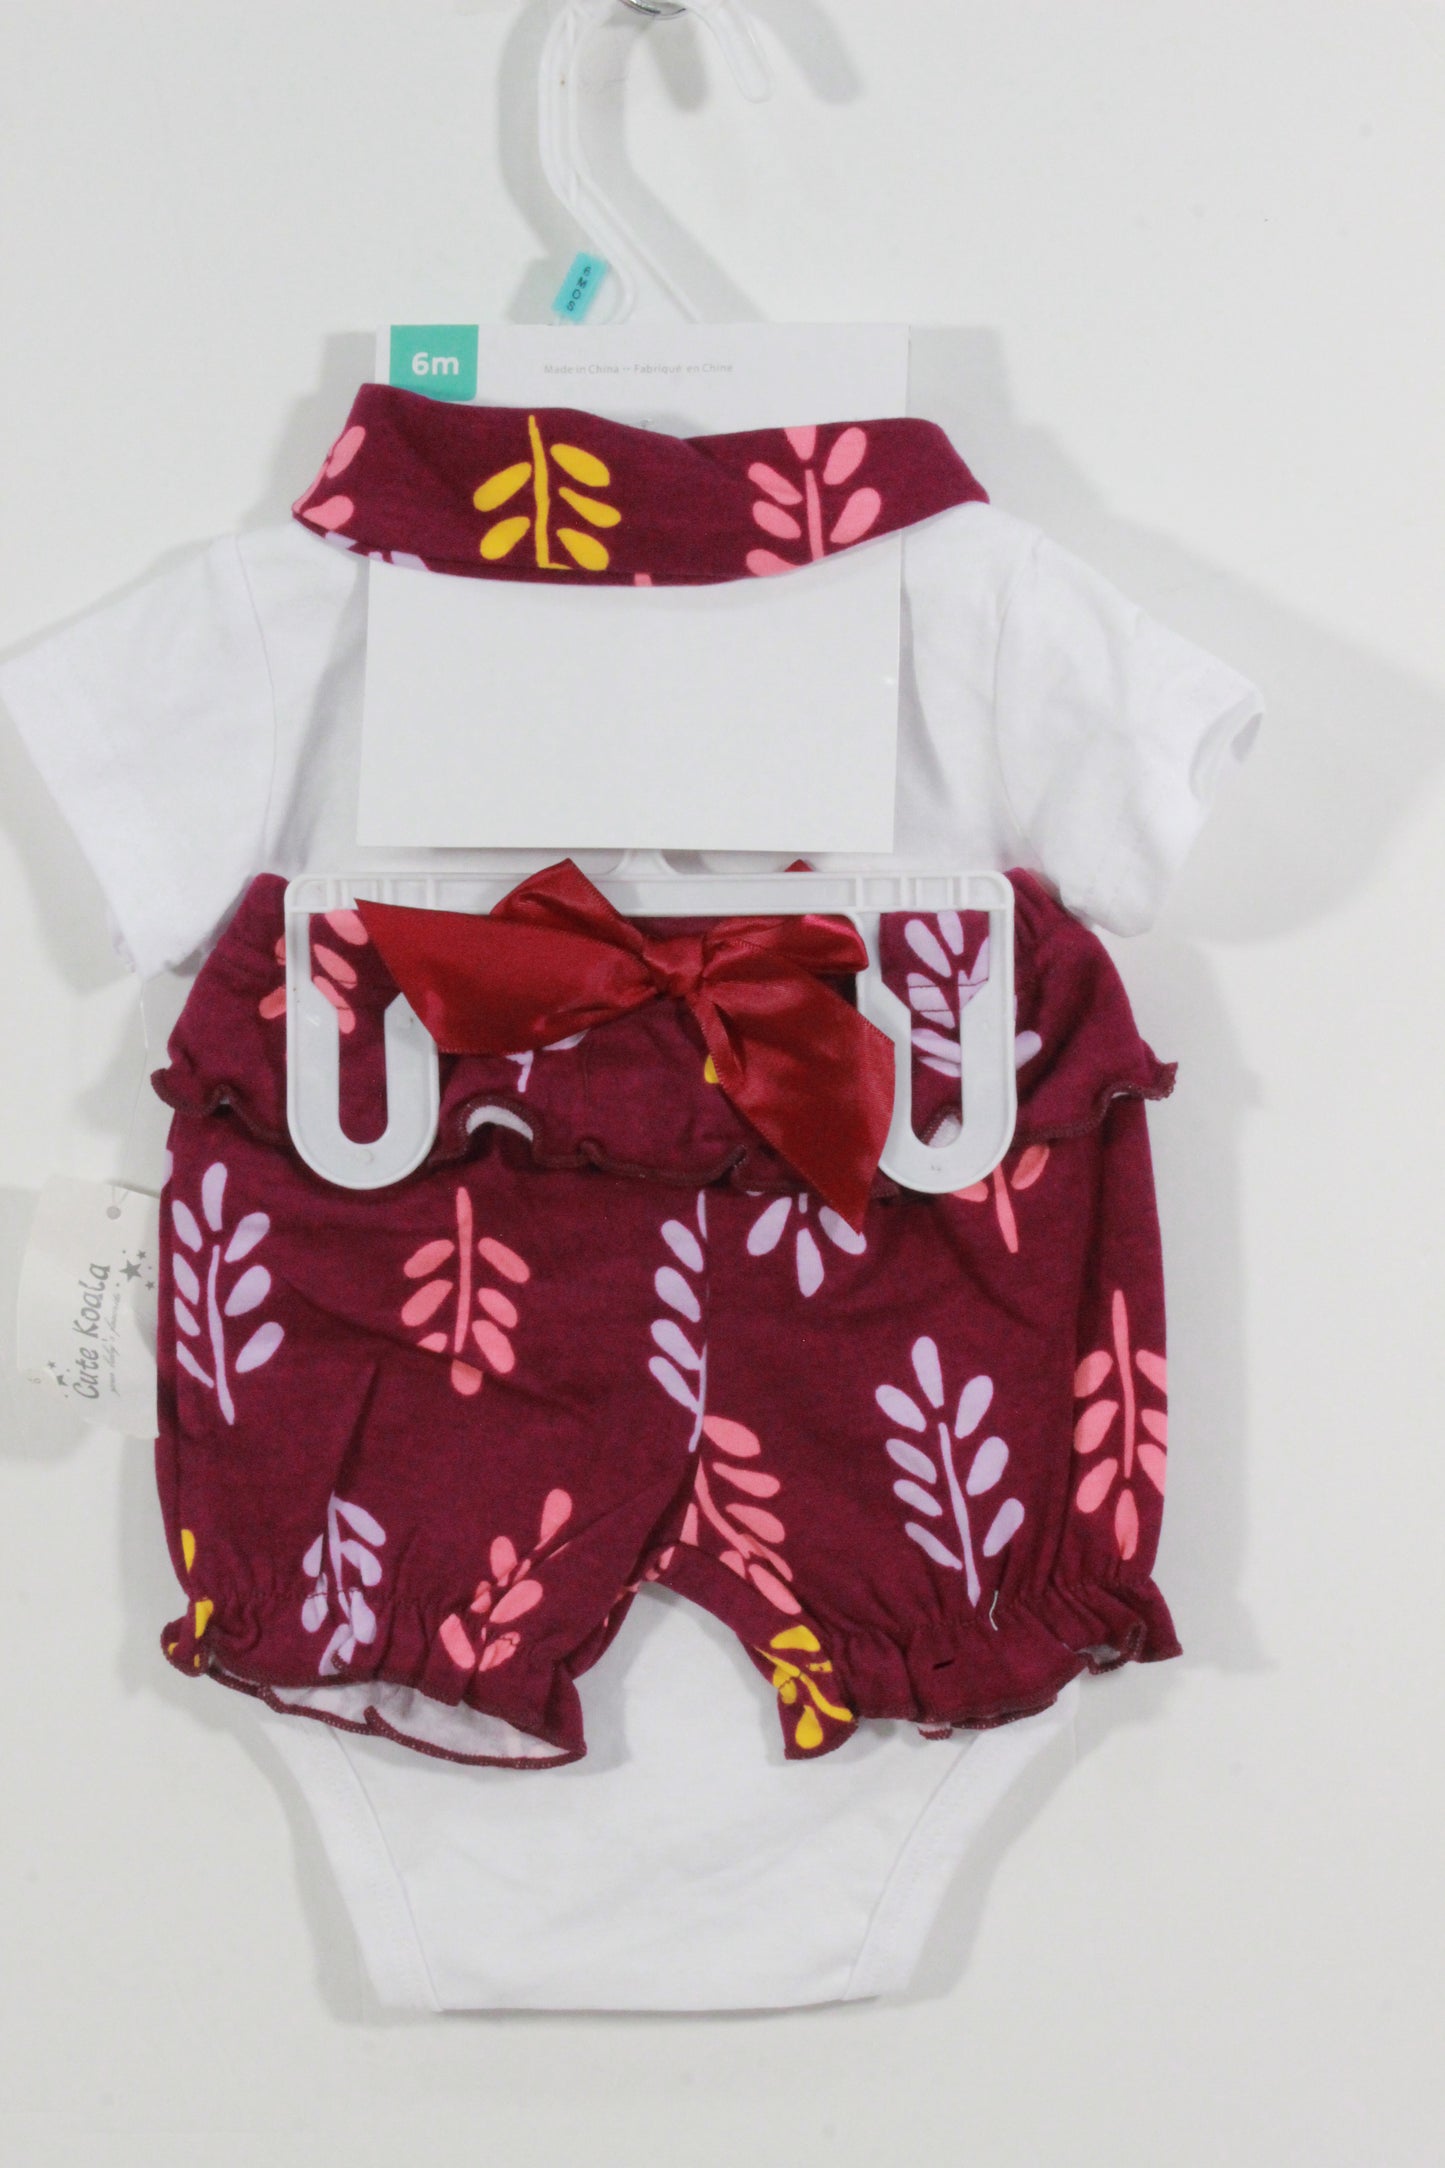 BABY GIRL OUT WEAR SET